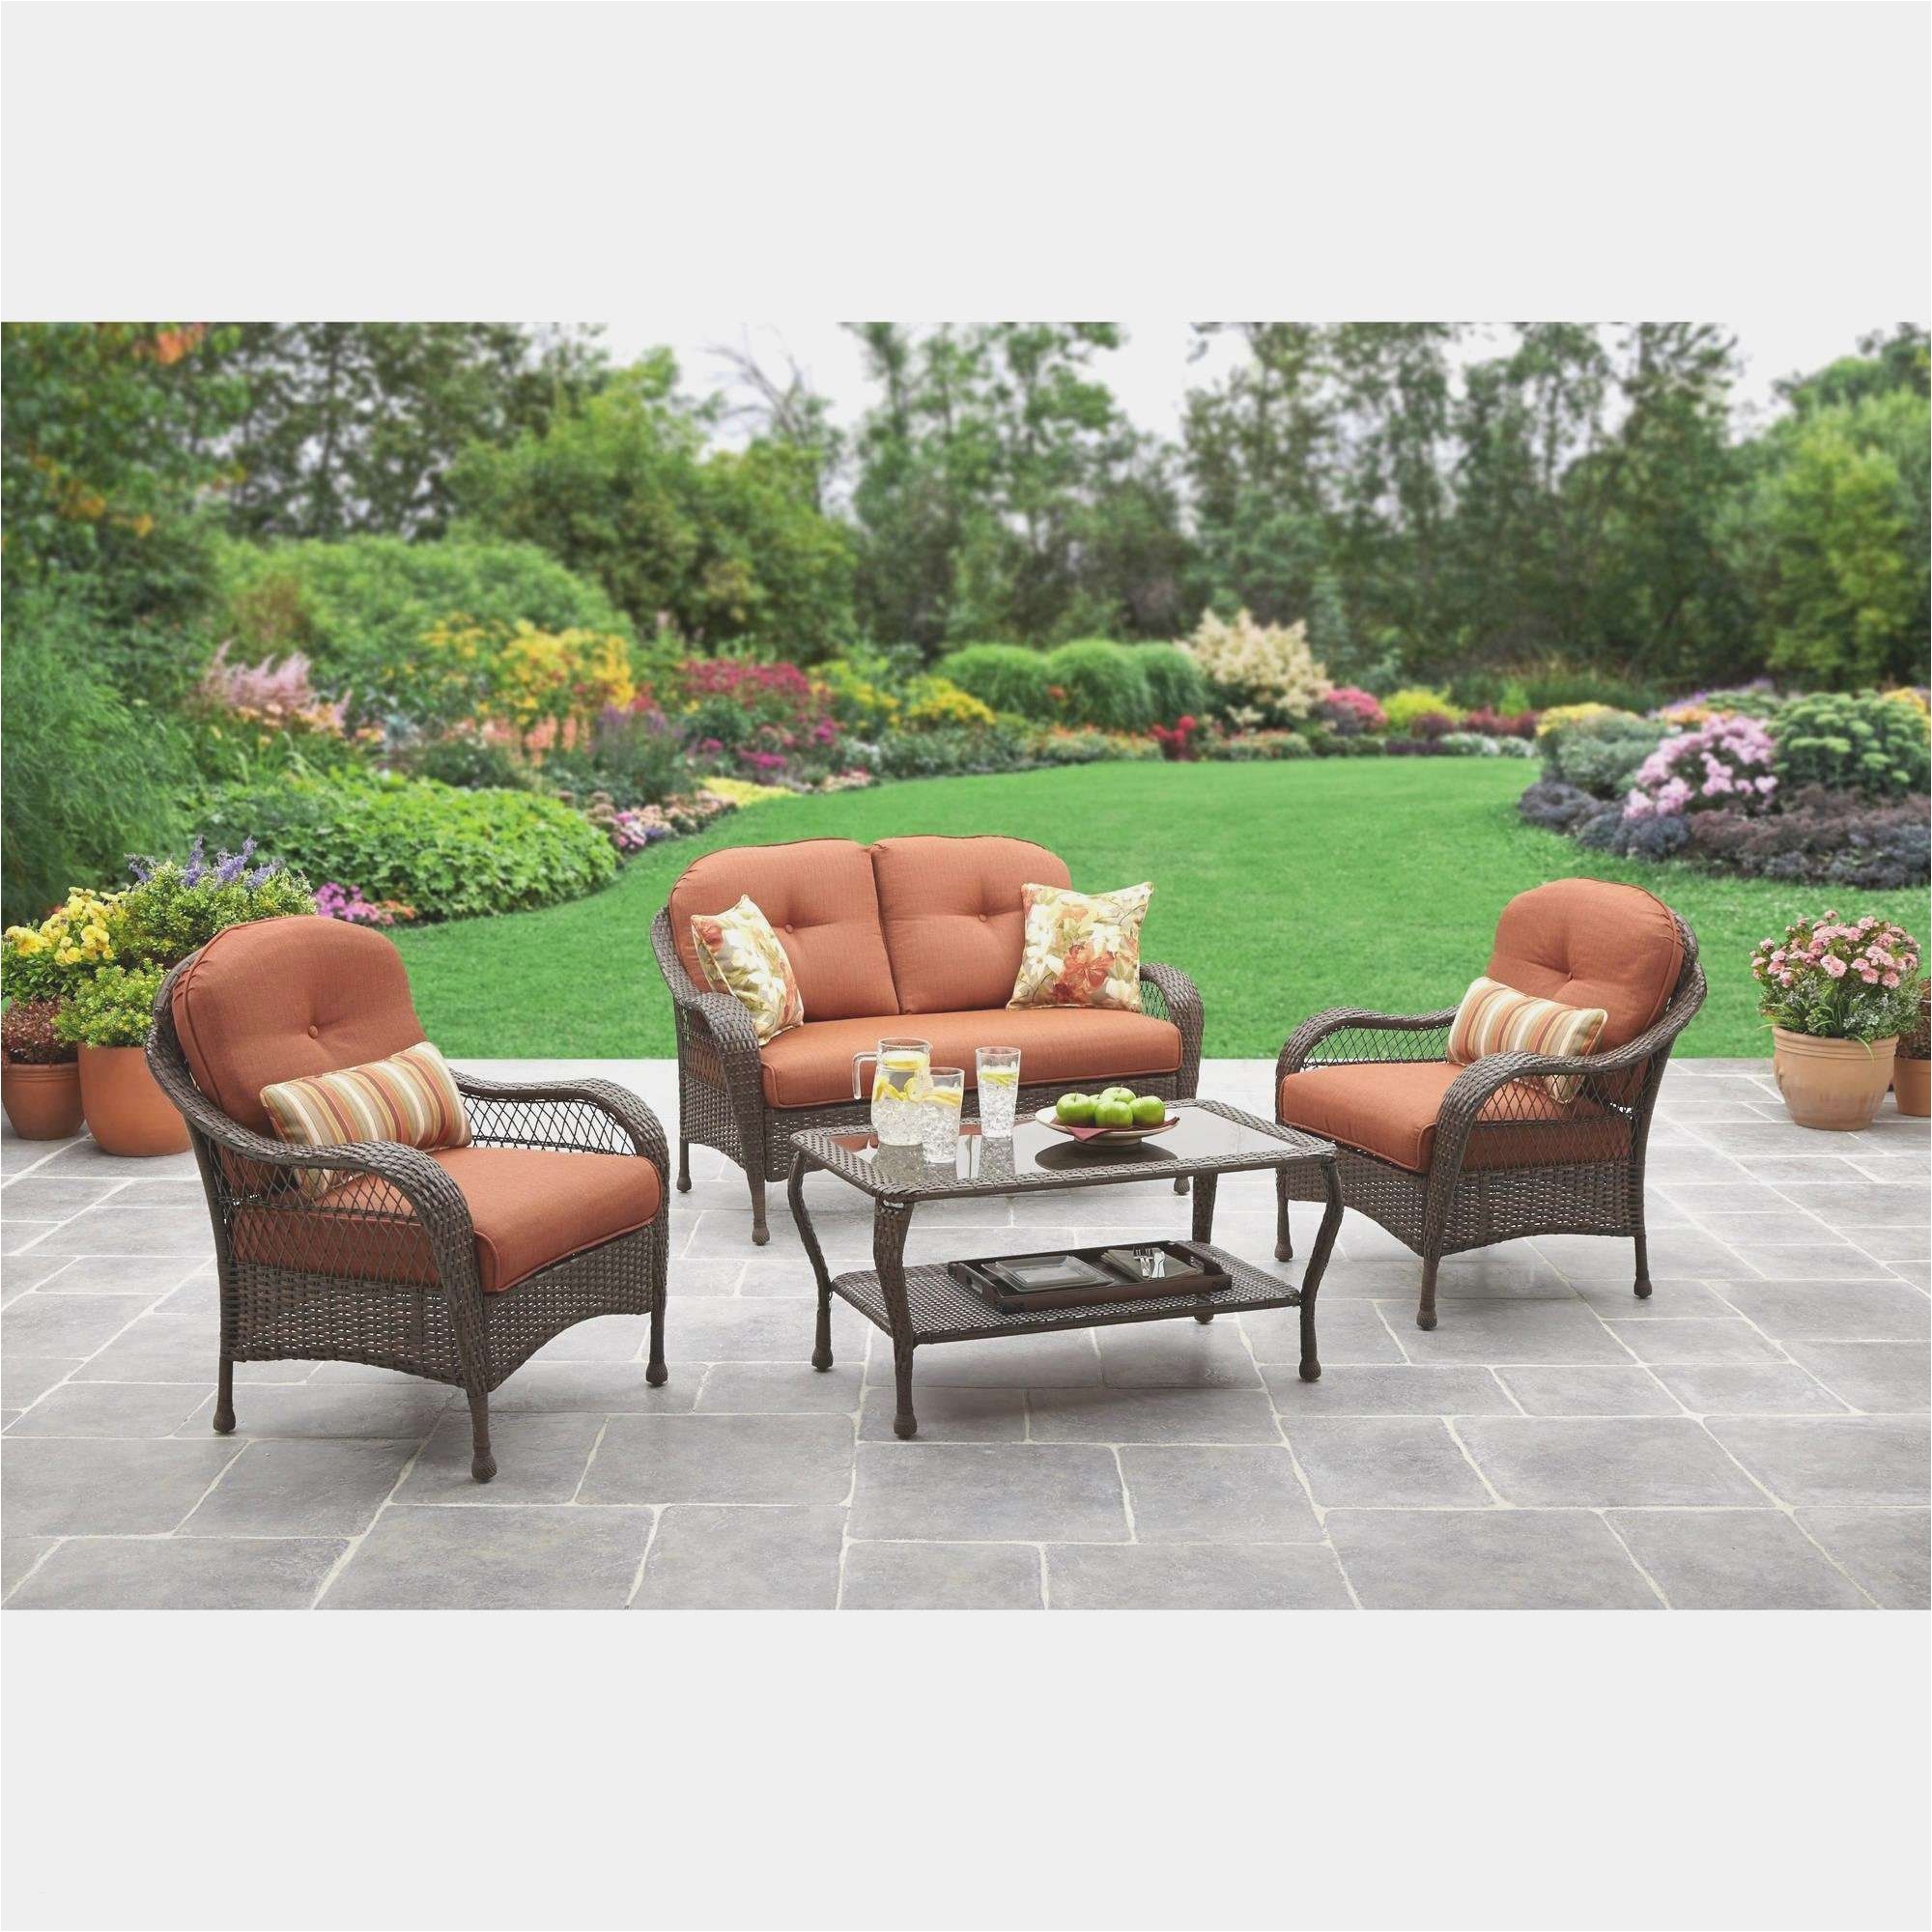 high top patio table set best new lowes clearance patio furniture luxury of lowes outdoor patio